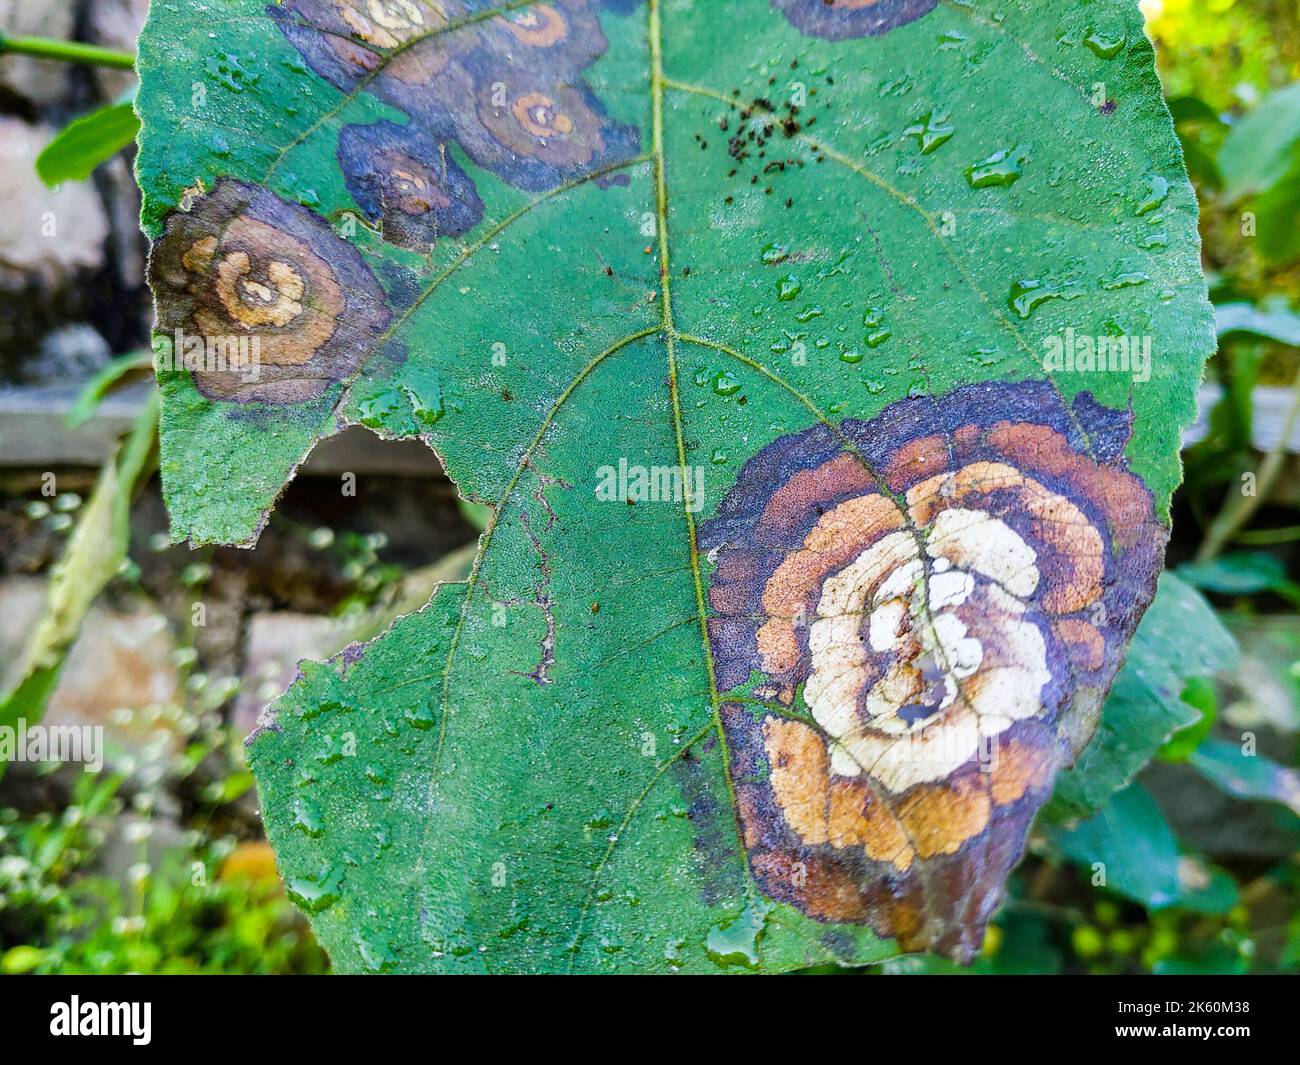 Plant diseases. Leaf spot caused by Colletotrichum species. Typical symptoms, appearing as circular or ovoid, sunken, and brown lesions with a yellow Stock Photo